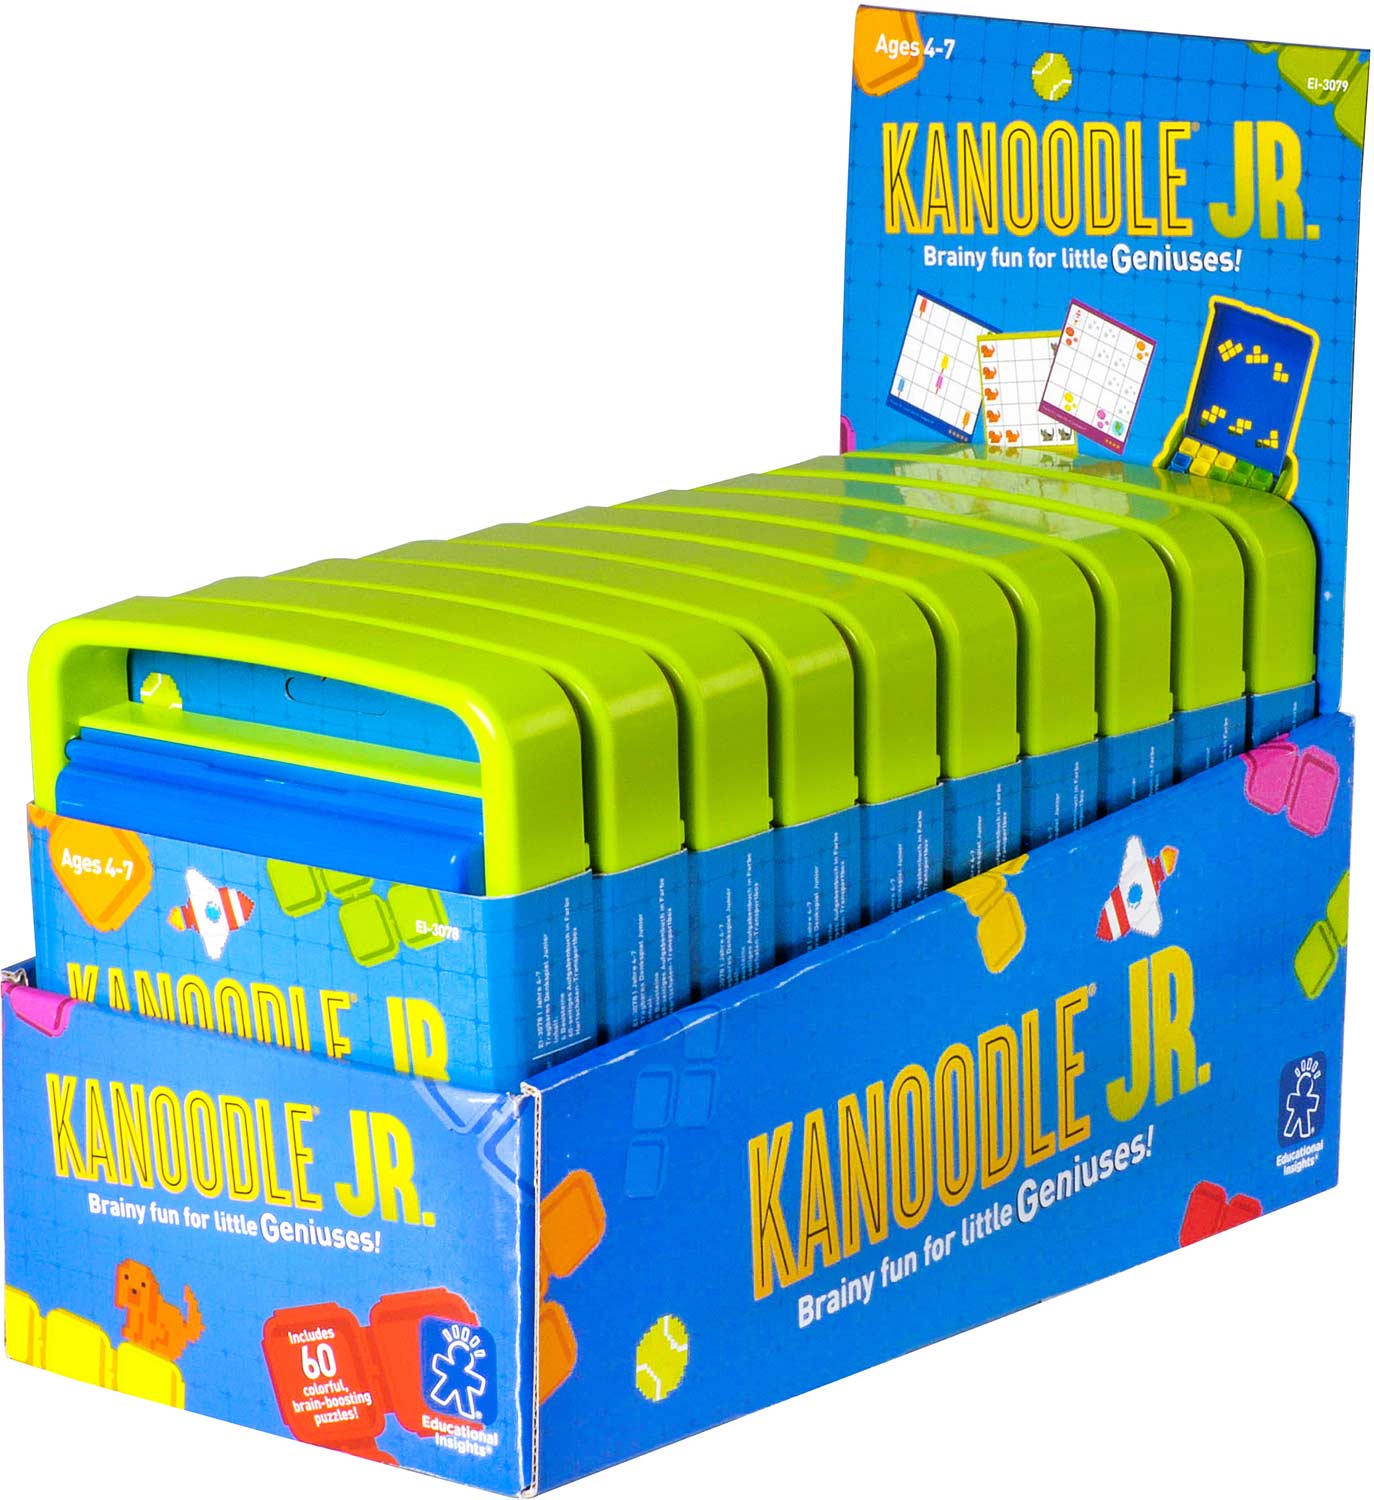 Educational Insights Kanoodle Puzzle Game